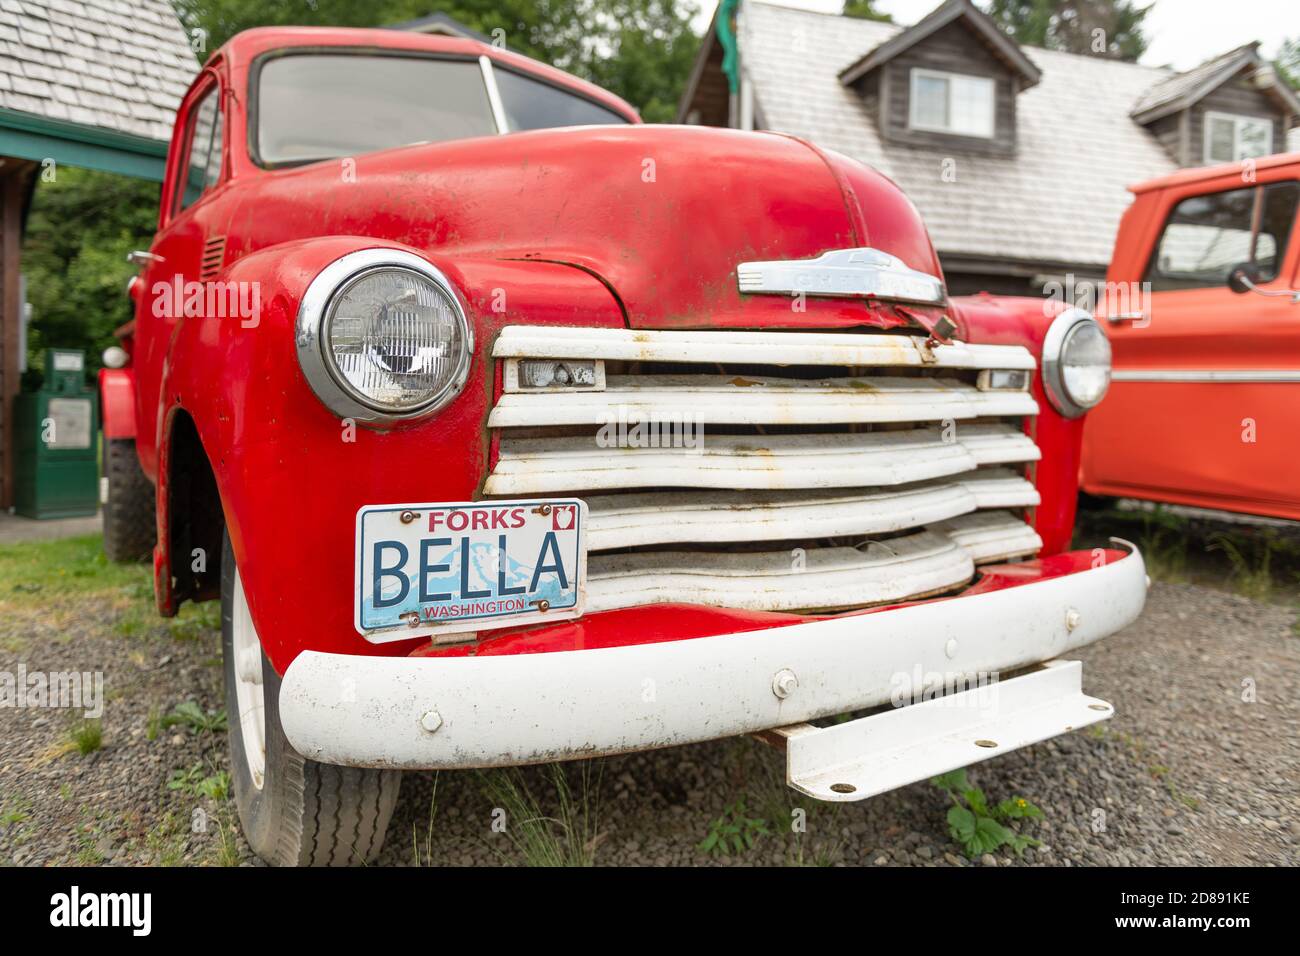 FORKS, WASHINGTON - JUNE 27, 2018: Red pick up trucks from the Twilight series. The town was the setting for the films. Stock Photo